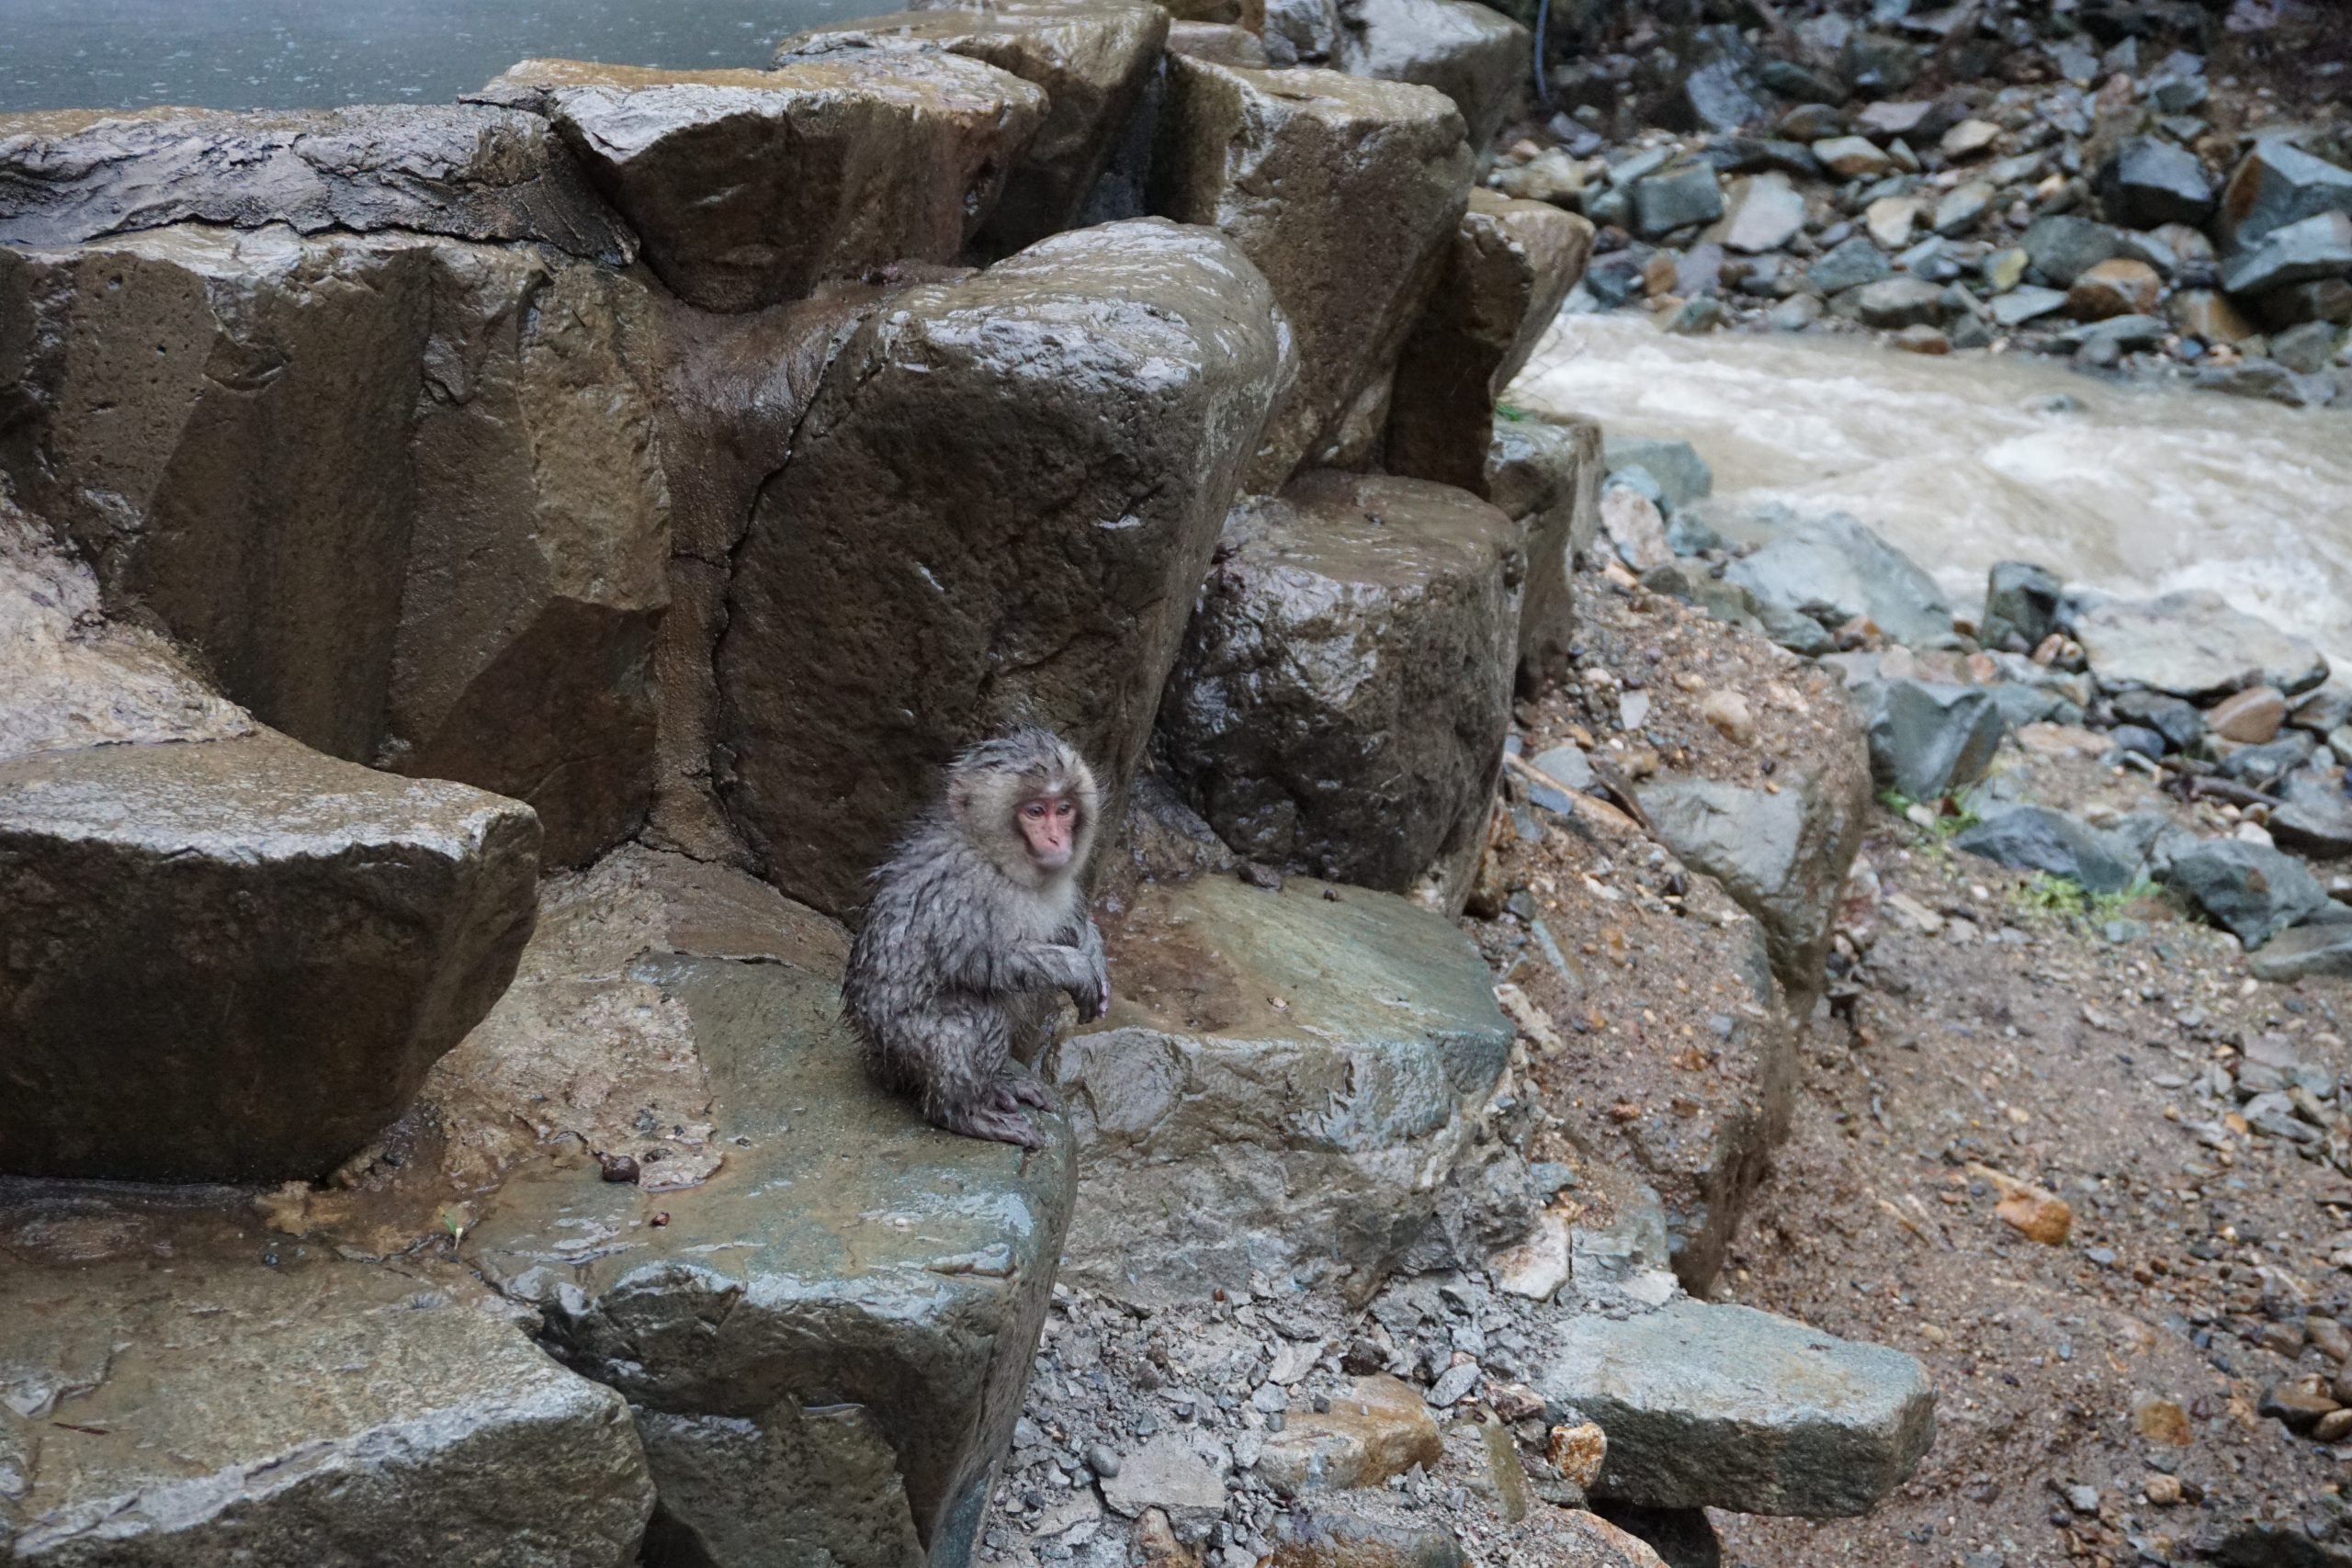 Cutest little monkey at the snow monkey park in Japan